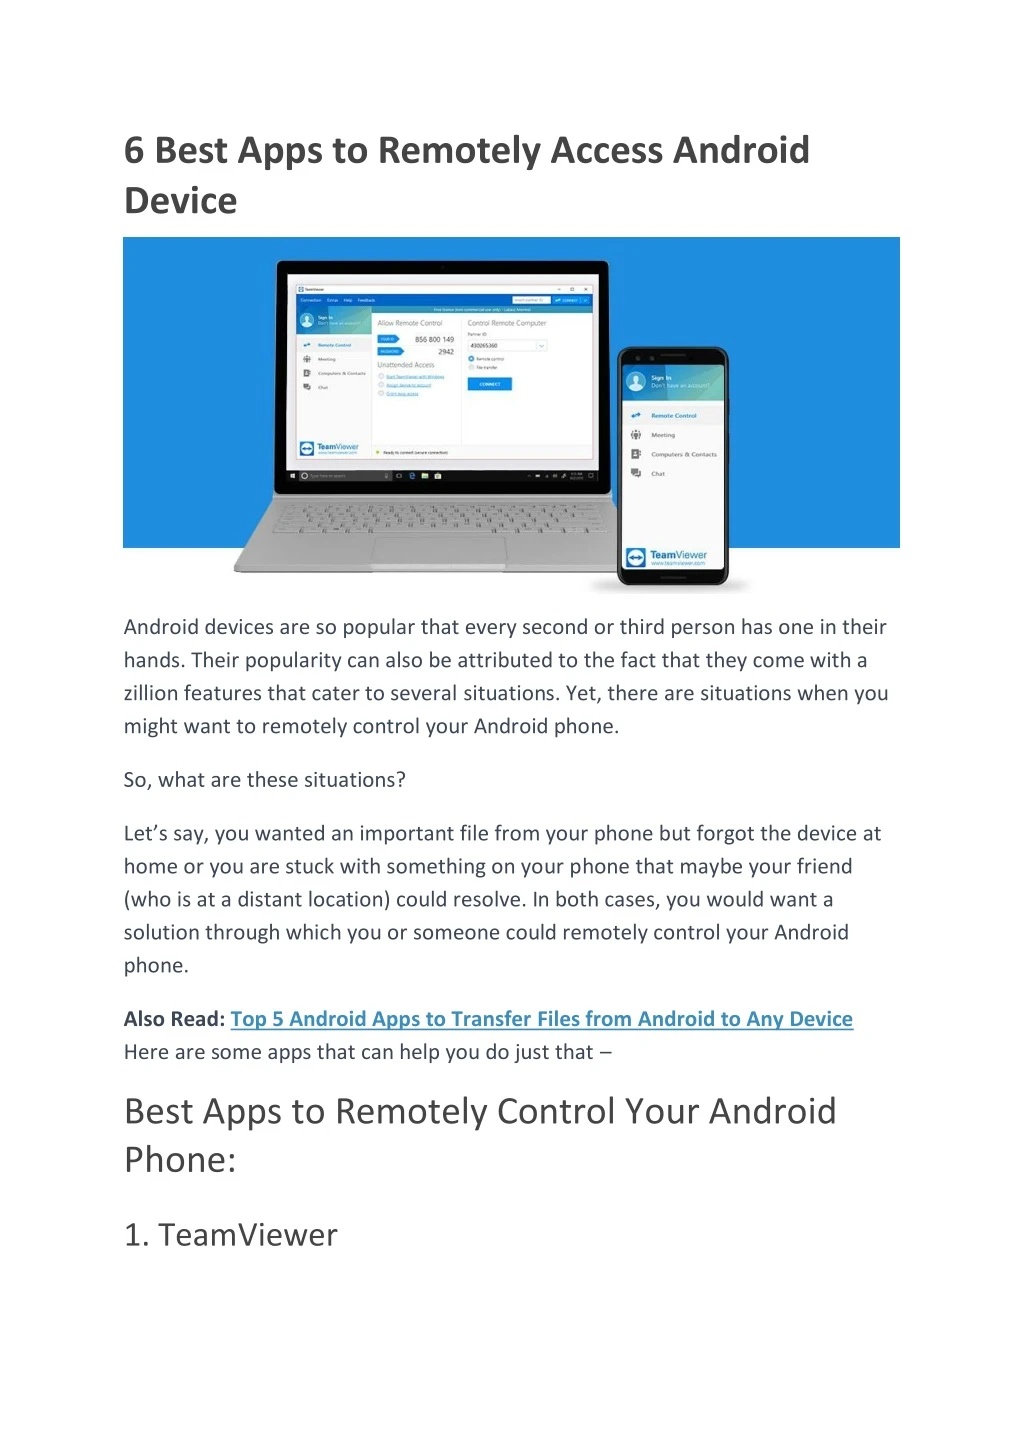 6 best apps to remotely access android device